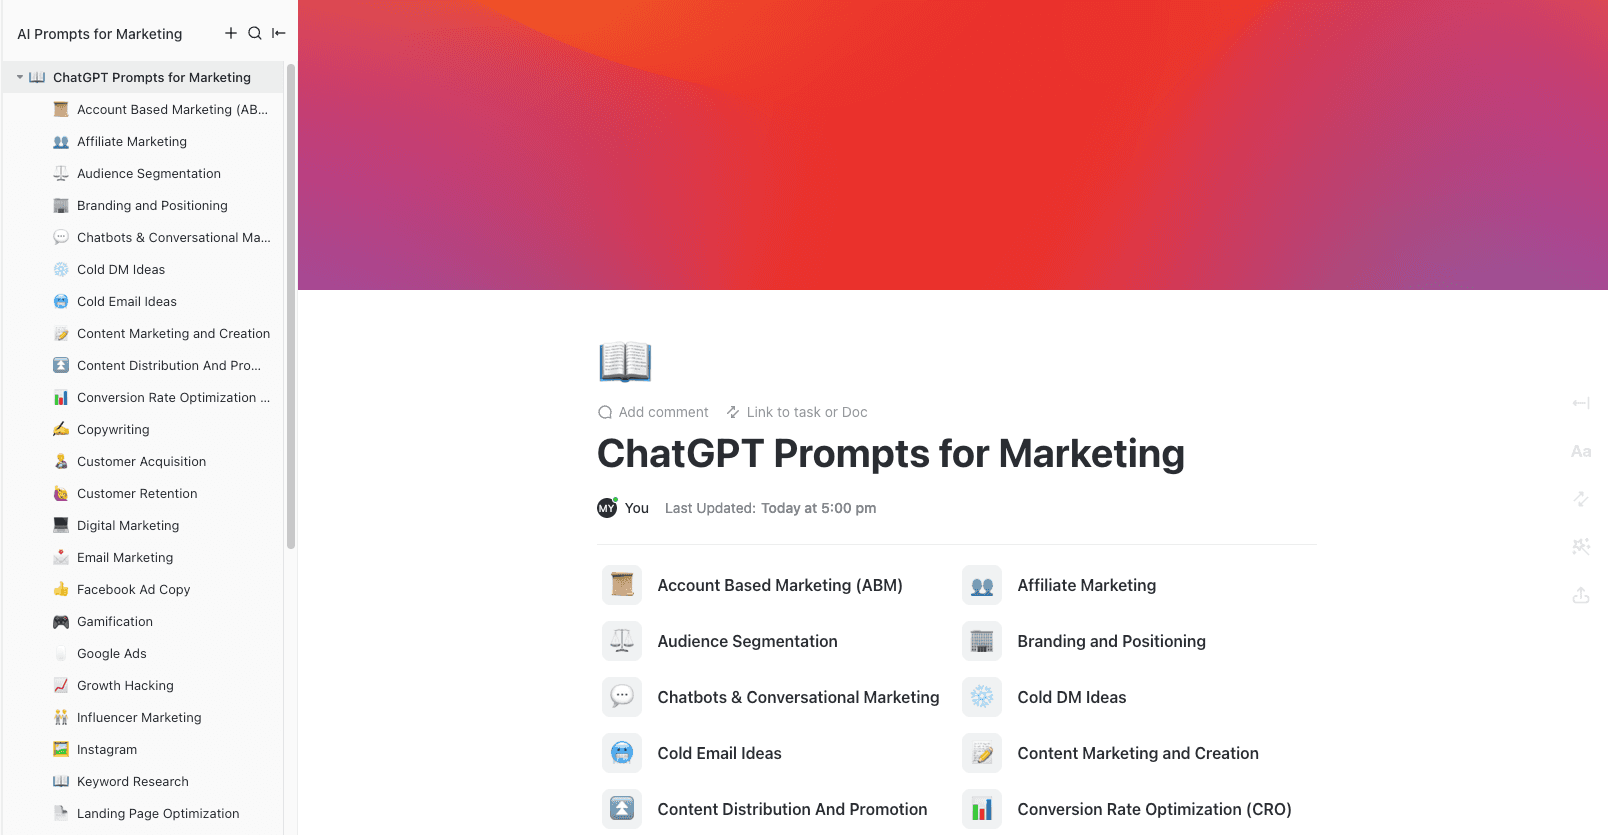 Use our treasure trove of ChatGPT marketing prompts (600+) that will supercharge your campaigns and engage your audience like never before.